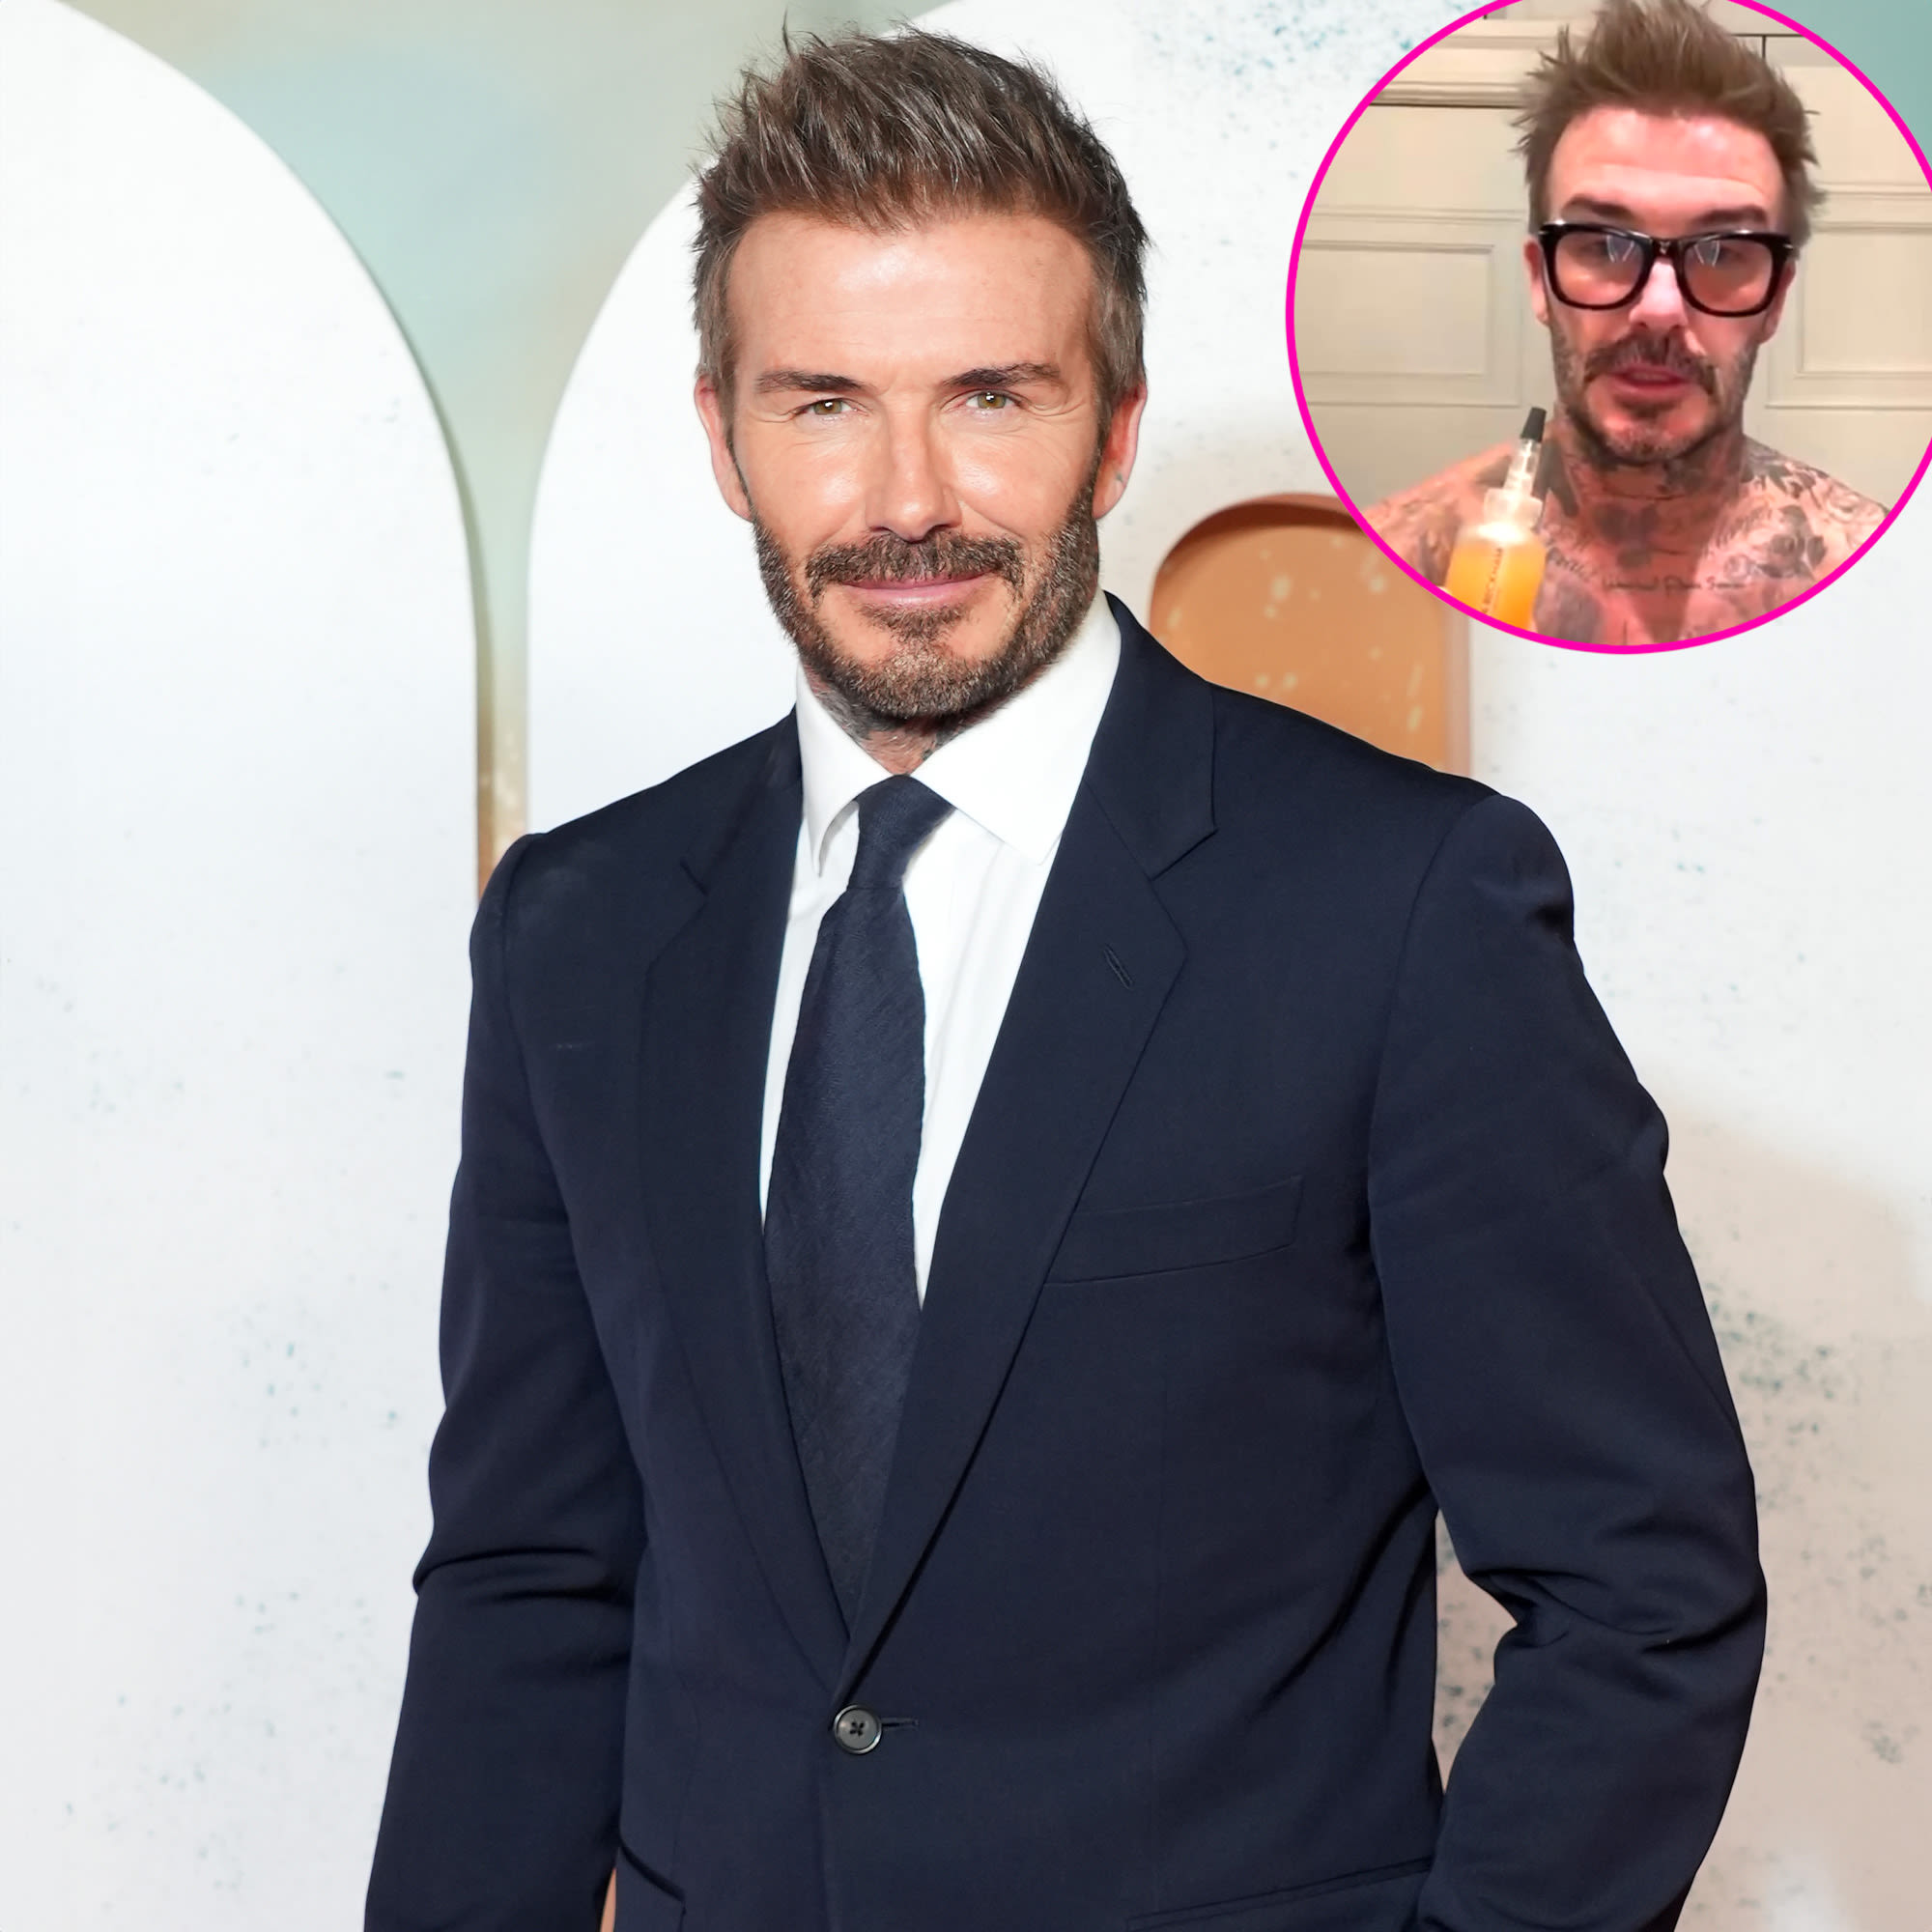 David Beckham Reveals His Morning Skincare Routine Using Wife Victoria Beckham’s Products